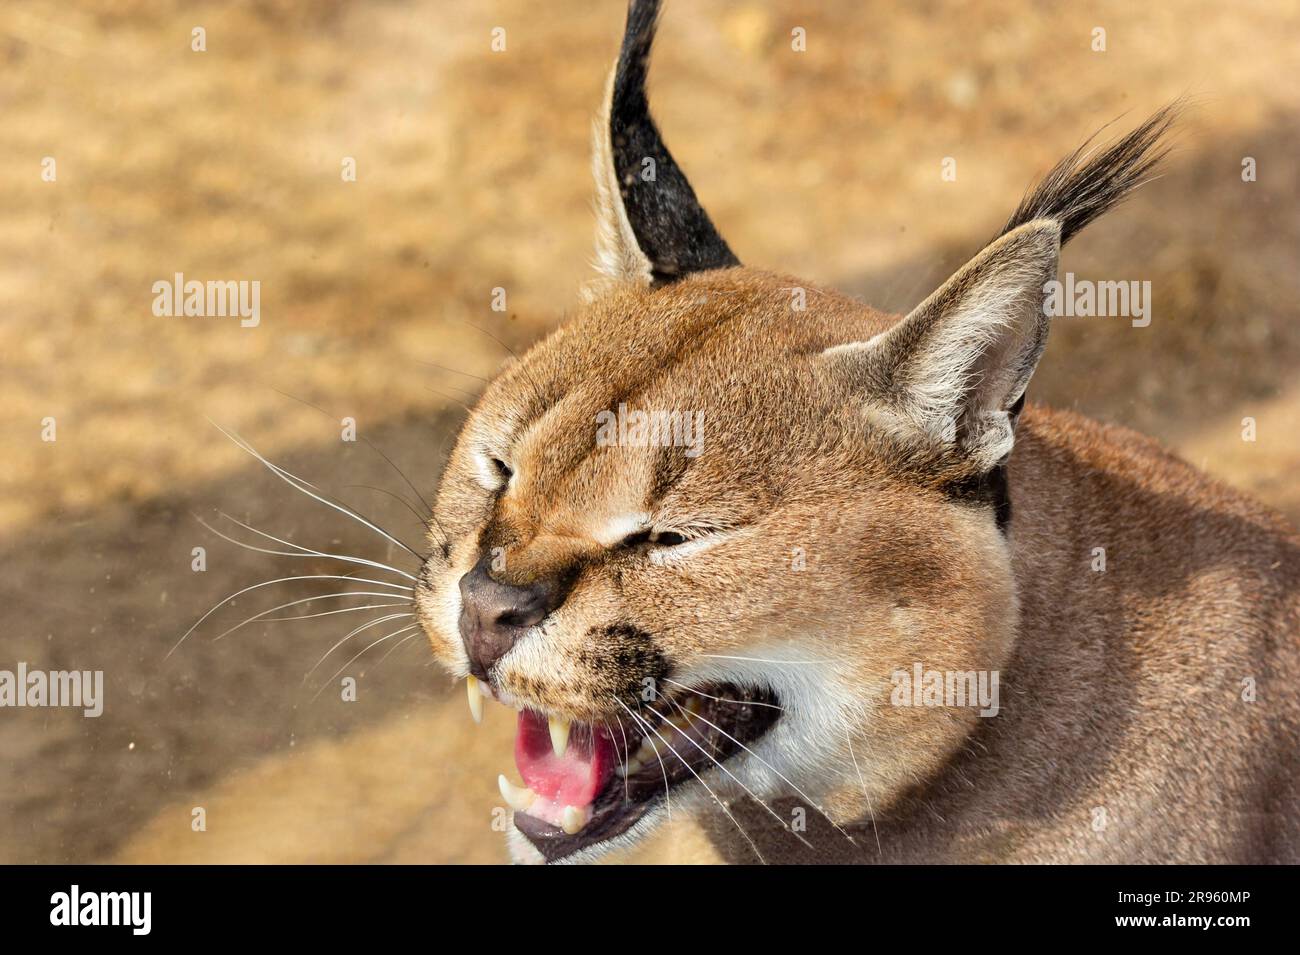 Steppe lynx, caracal in the zoo. Muzzle of a hissing and growling caracal Stock Photo